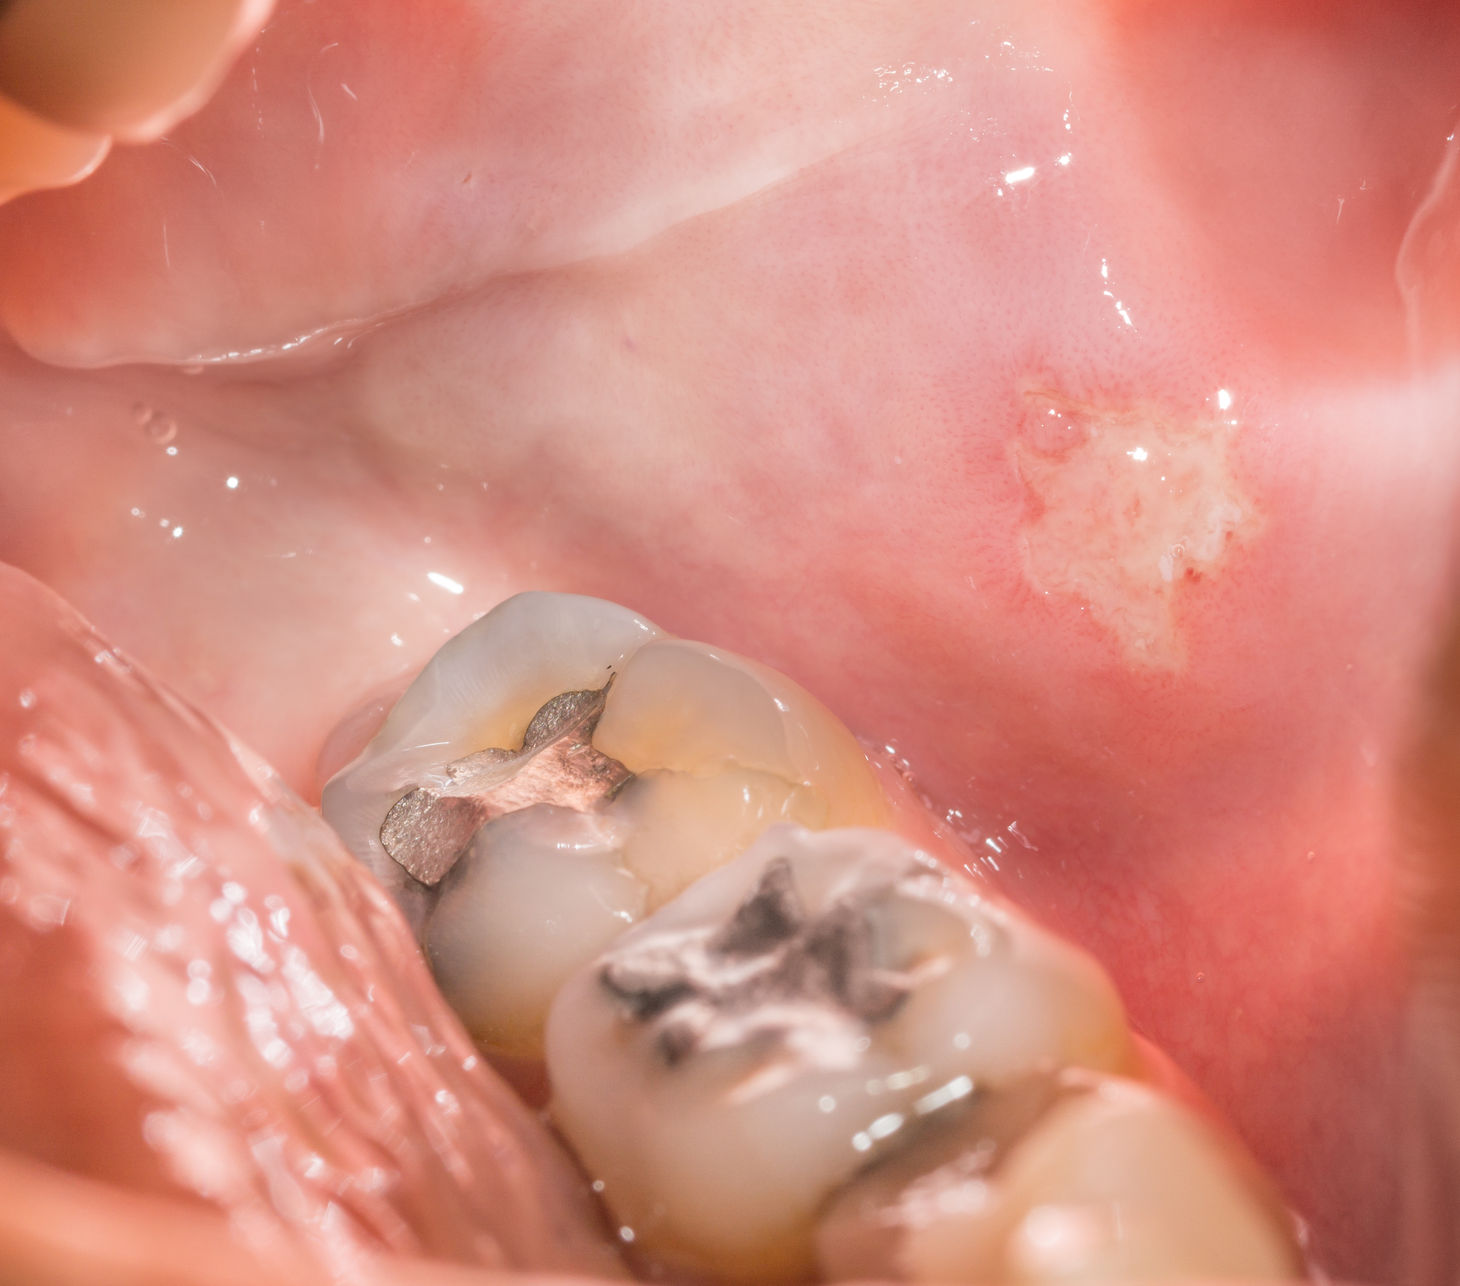 34651833 - closeup view of back tooth and sore, open mouth